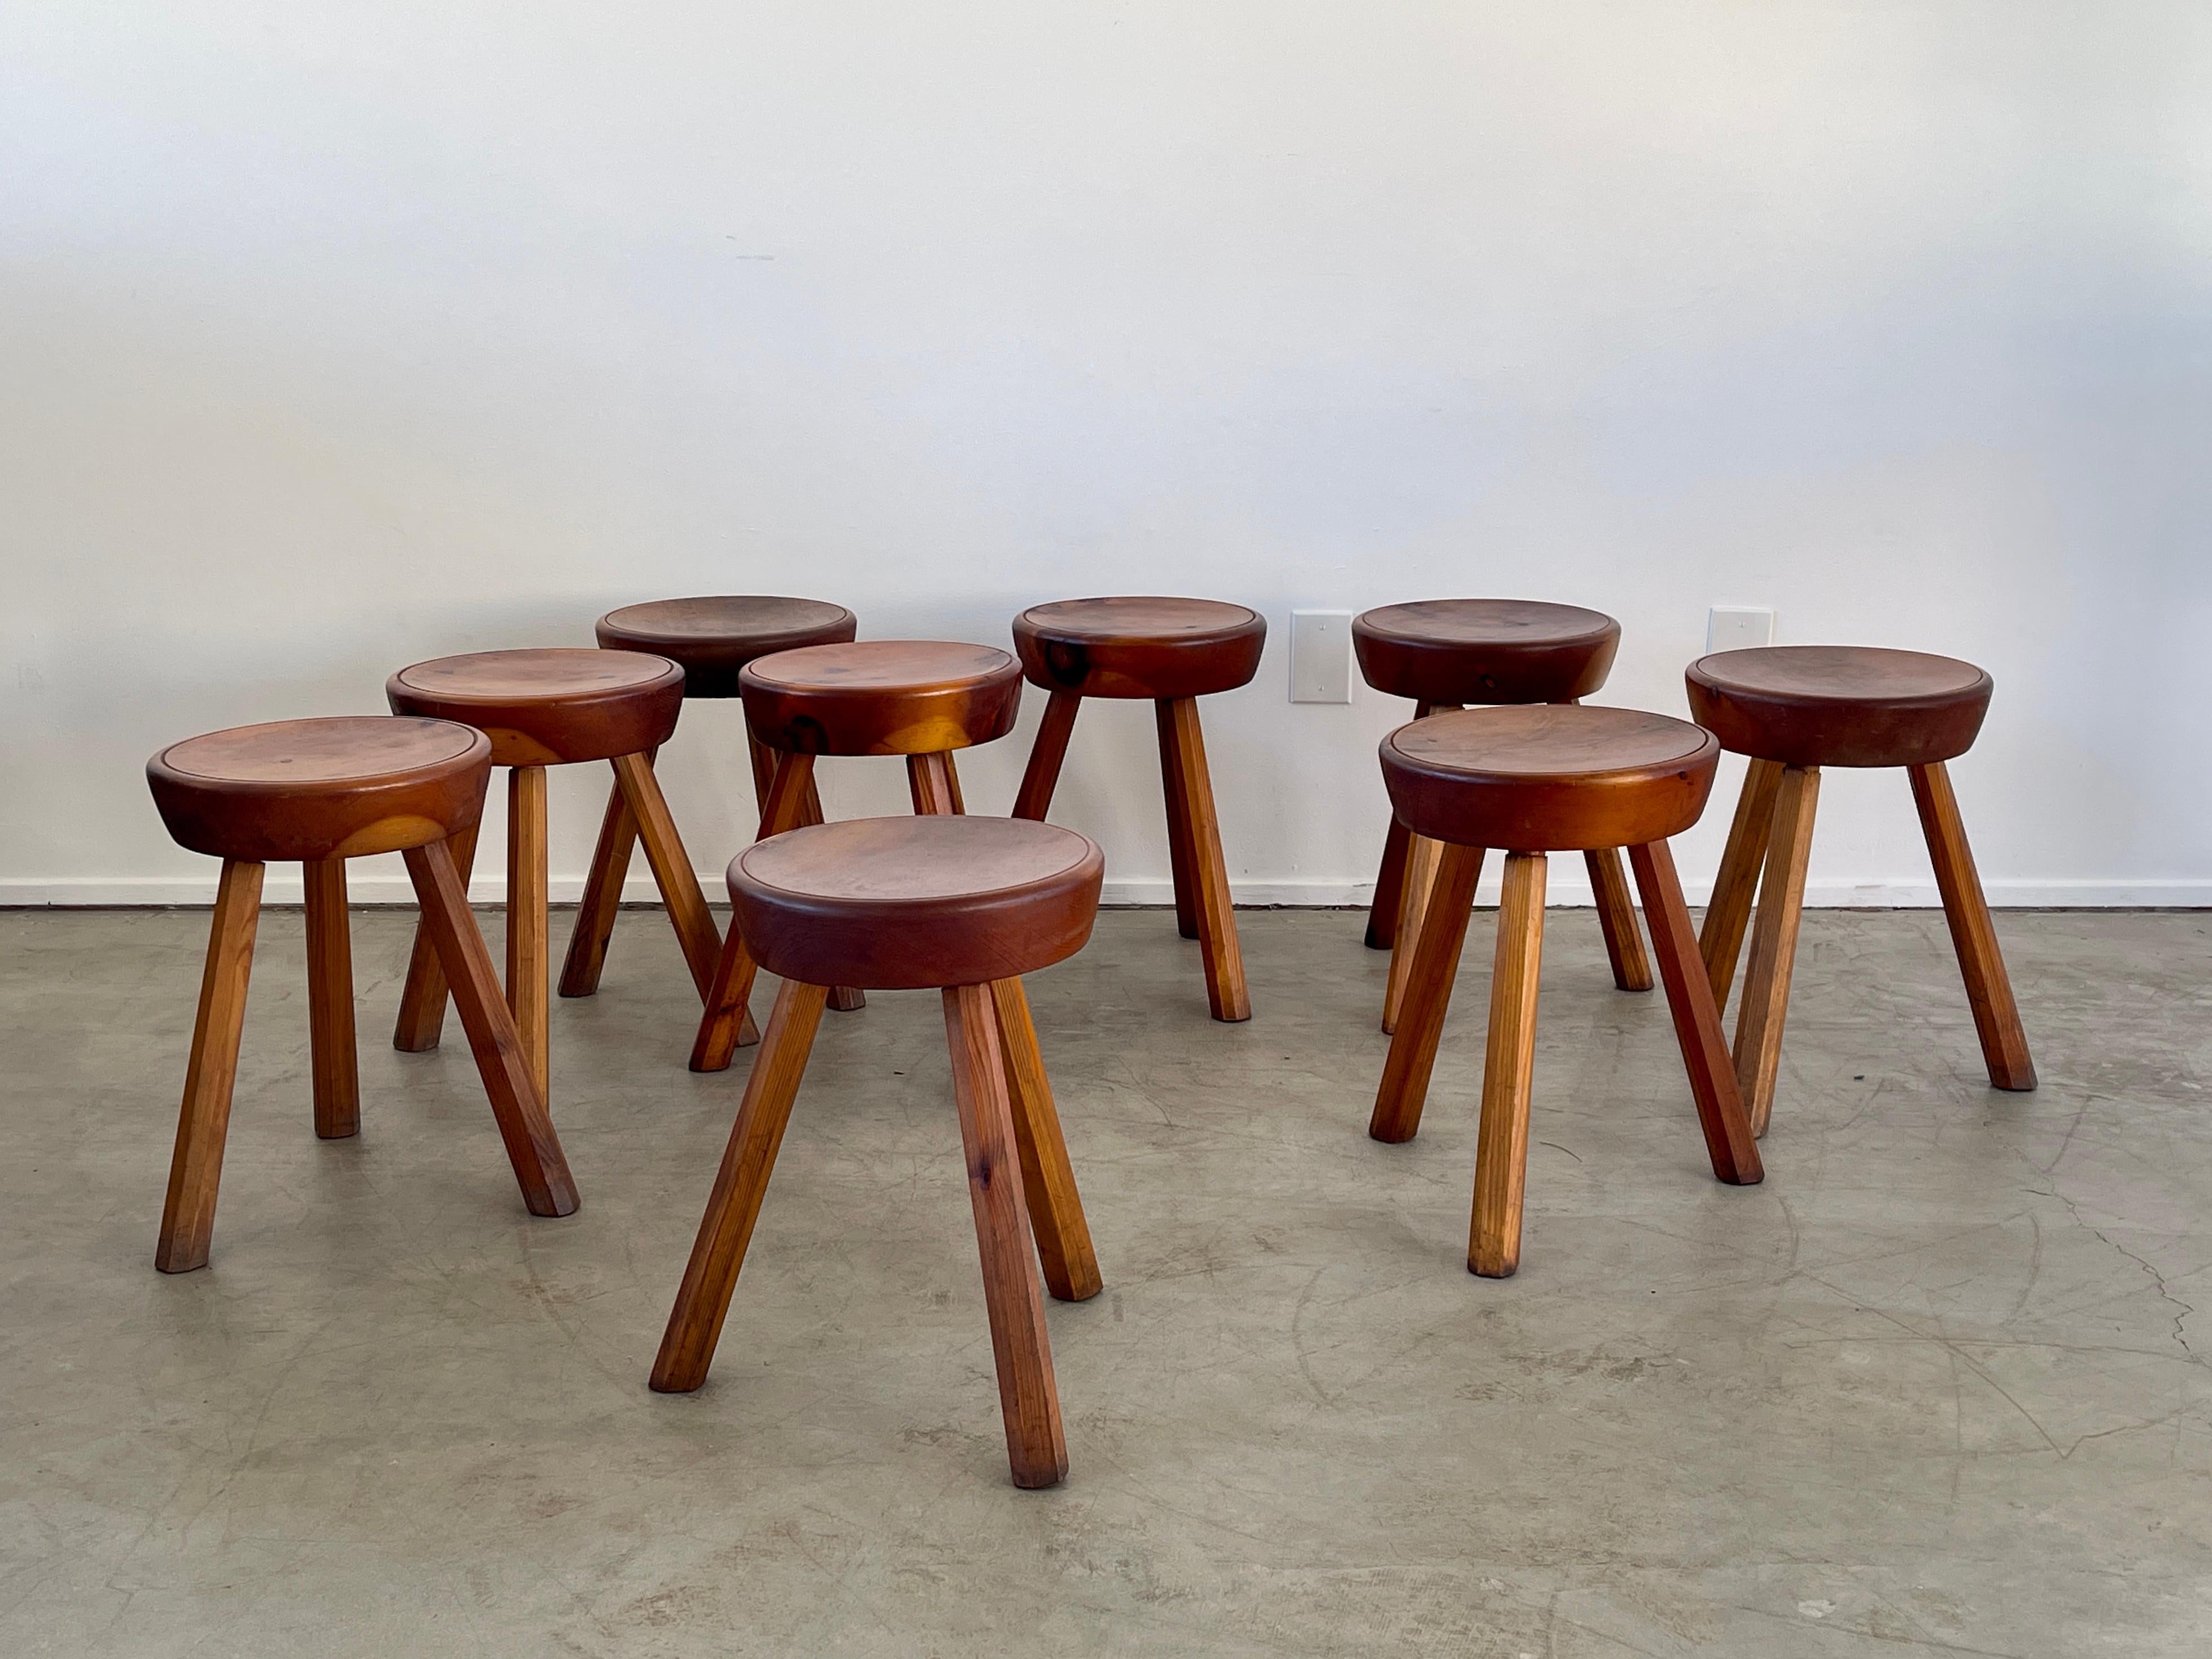 French pine stools in the style of Pierre Chapo / or Charlotte Perriand
Thick round wood tops on tripod legs 
Wonderful patina and scale.